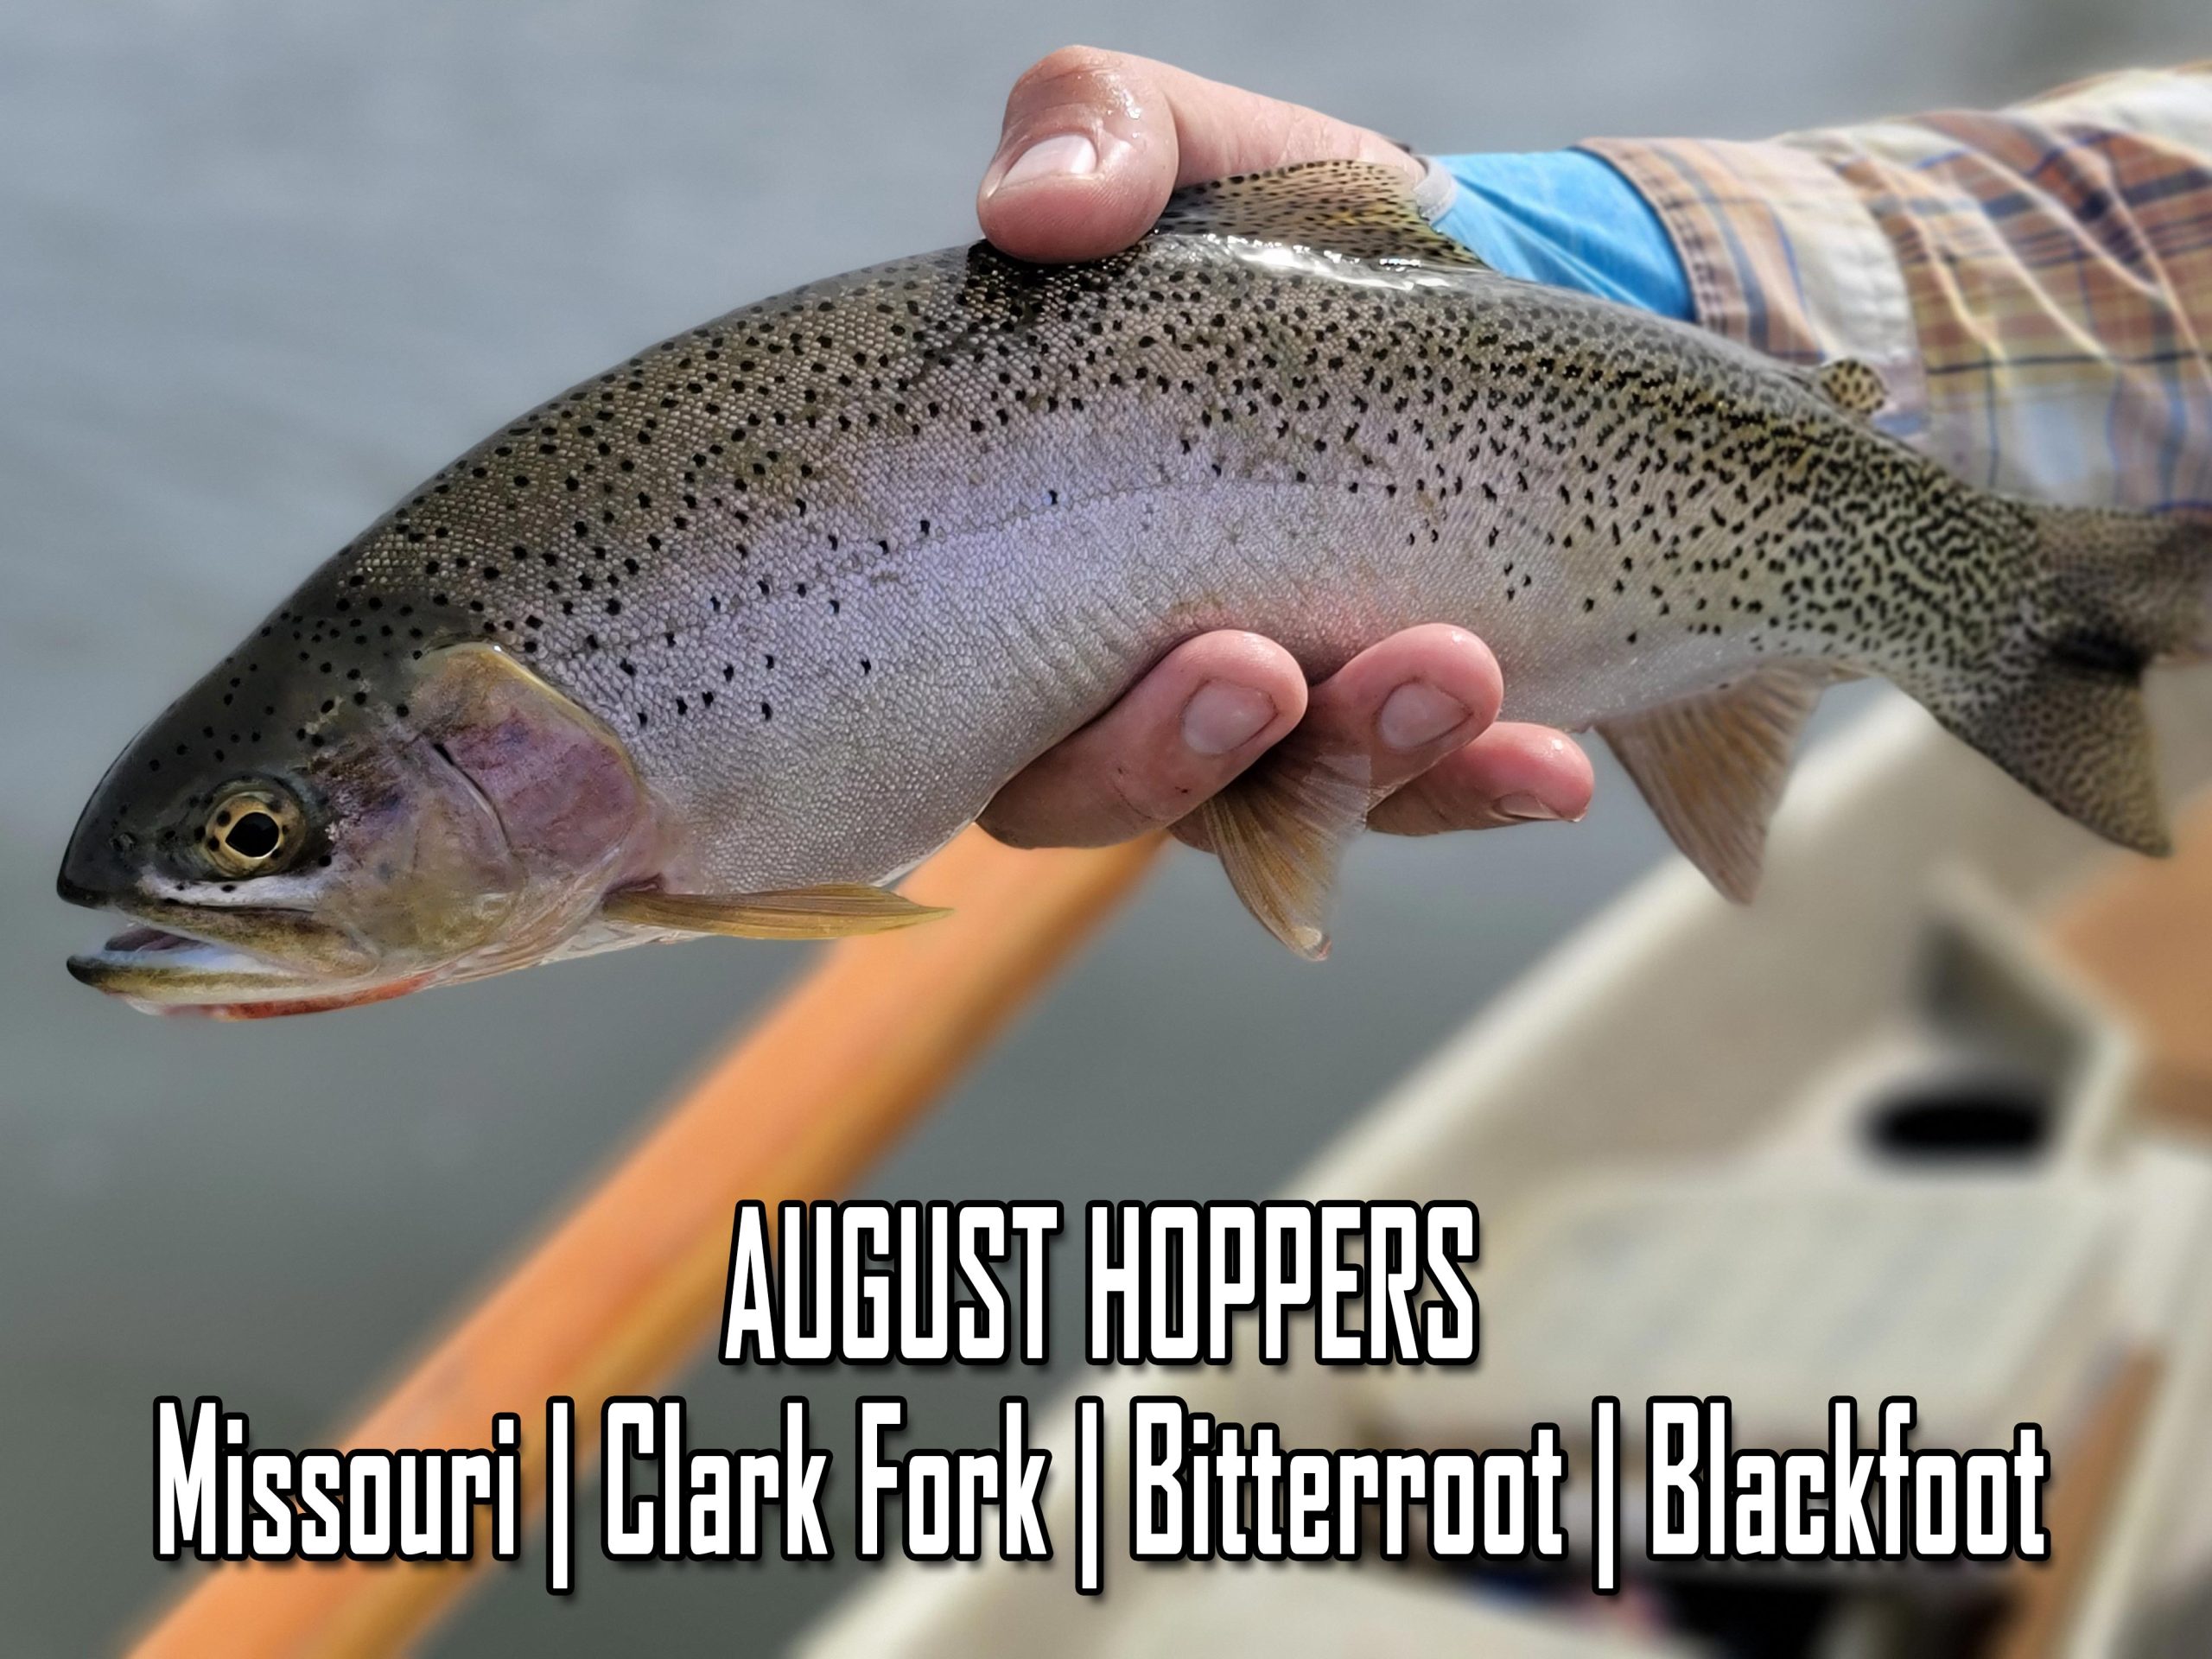 Hoppers, What Can You Say, Fun Times On All These Rivers. We Cannot Overlook The Trico Fishing On The Missouri River.